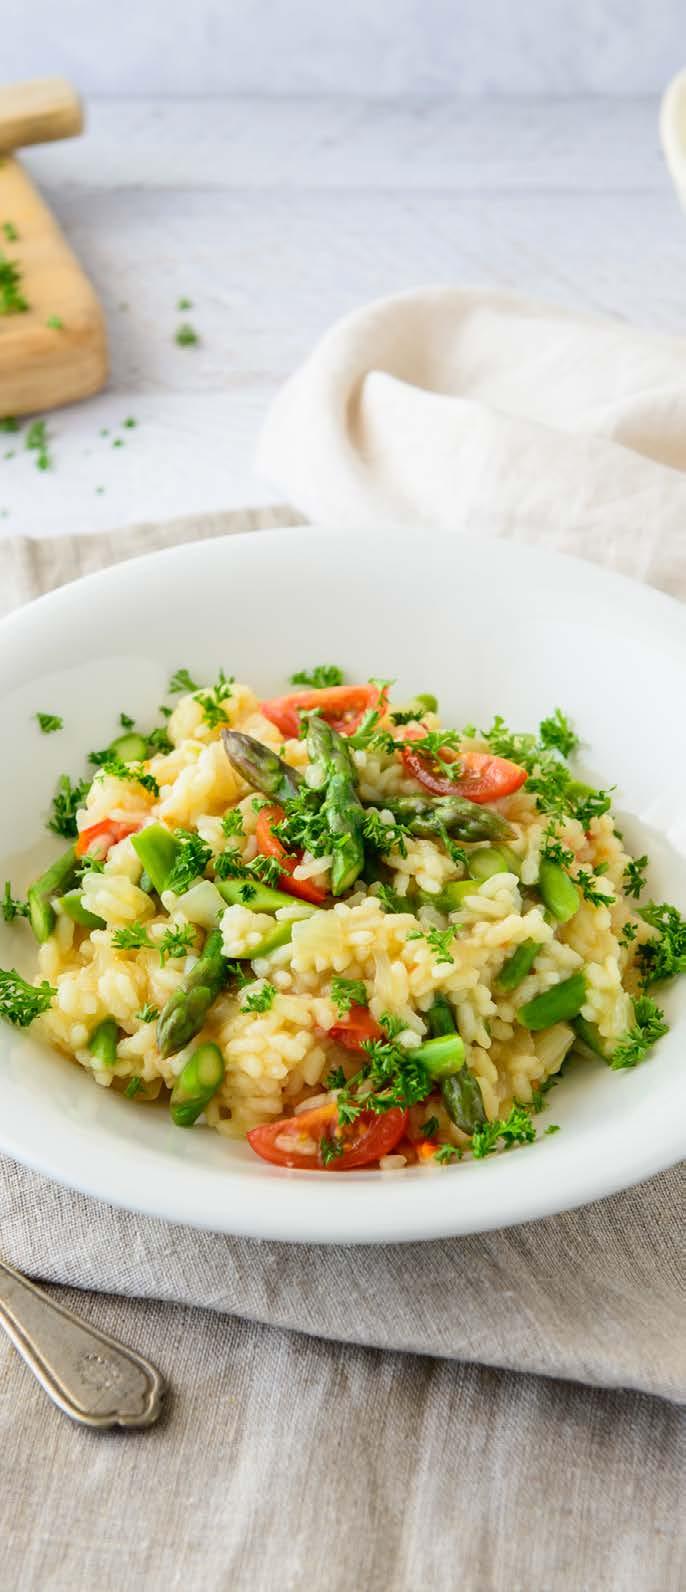 ASPARAGUS & TOMATO RISOTTO Ingredients (Makes 4 serves) l 2 tbsp extra virgin olive oil l 1 brown onion, diced l 2 garlic cloves, finely diced l 1 1/3 cup arborio rice (uncooked) l 1 litre